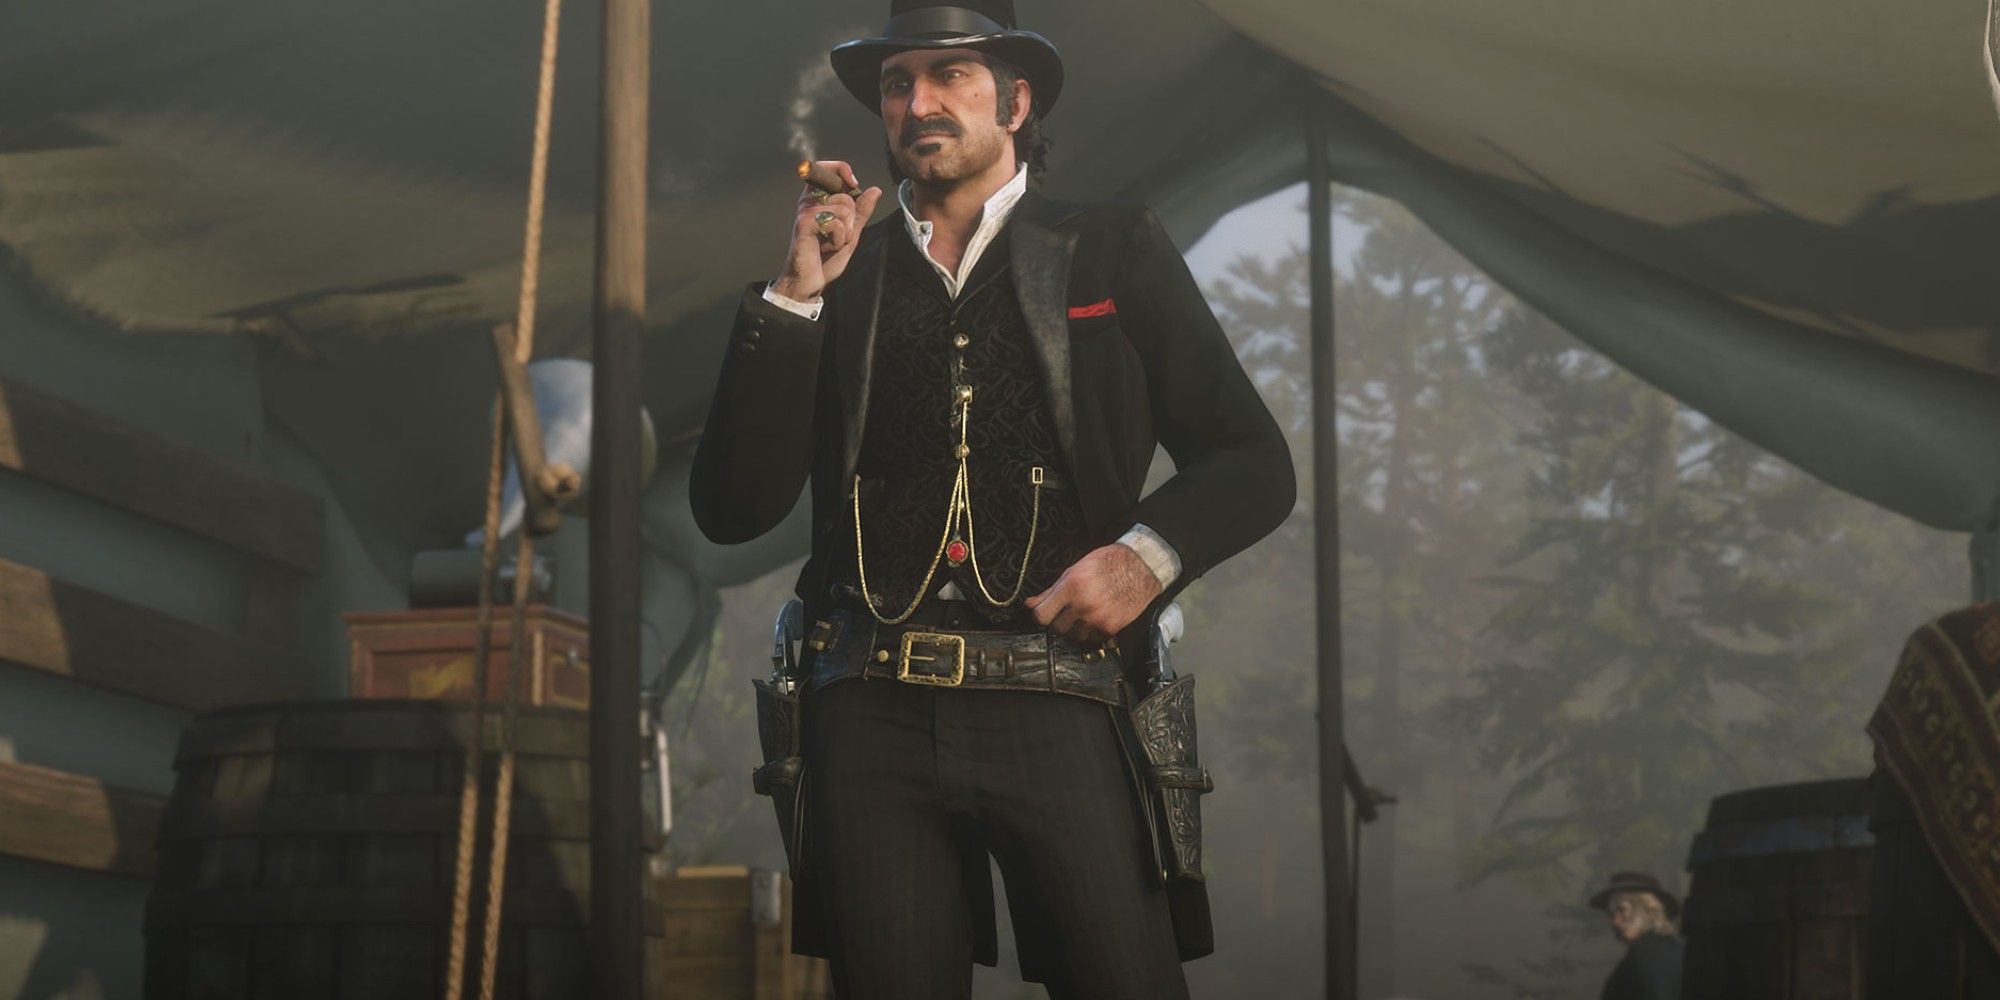 Dutch Van Der Linde smoking a cigar in his tent in the middle of the gang's camp in Red Dead Redemption 2